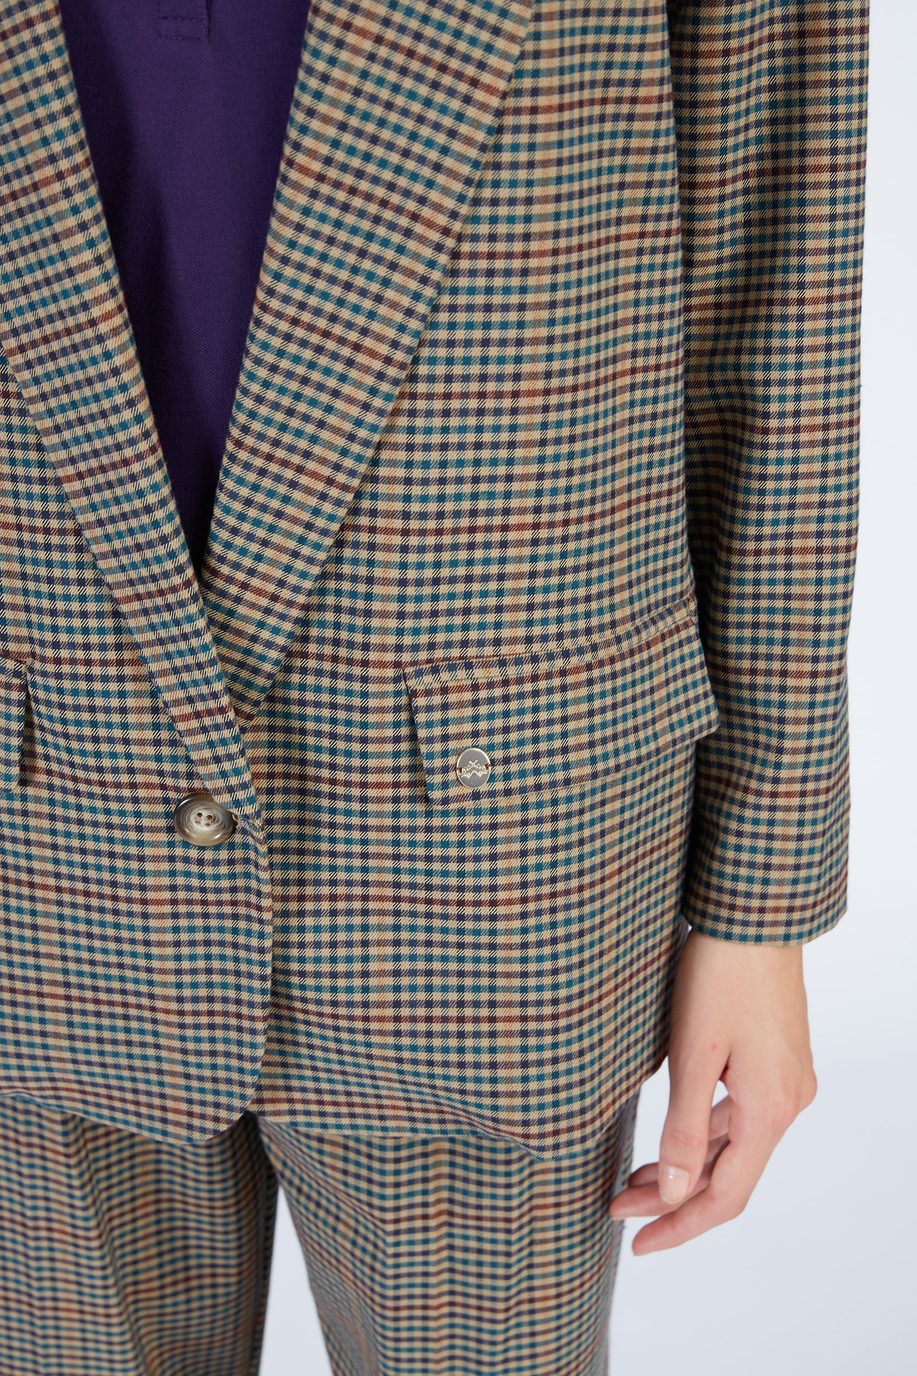 Women’s single-breasted twill jacquard blazer with pockets in regular fit | La Martina - Official Online Shop